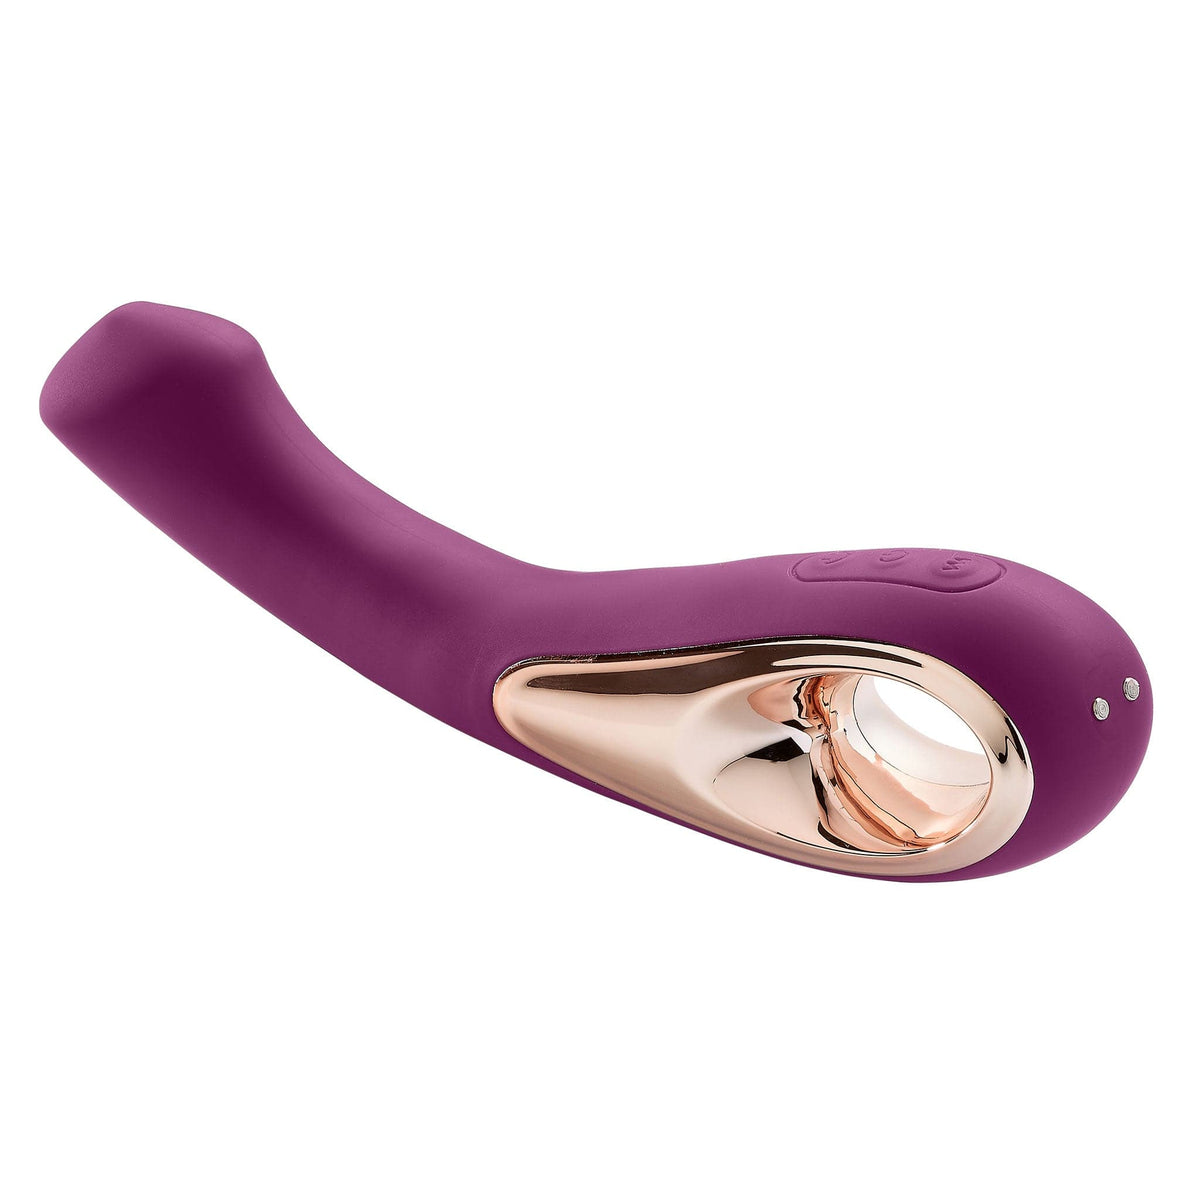 pro sensual roller touch tri function g spot curved form plum